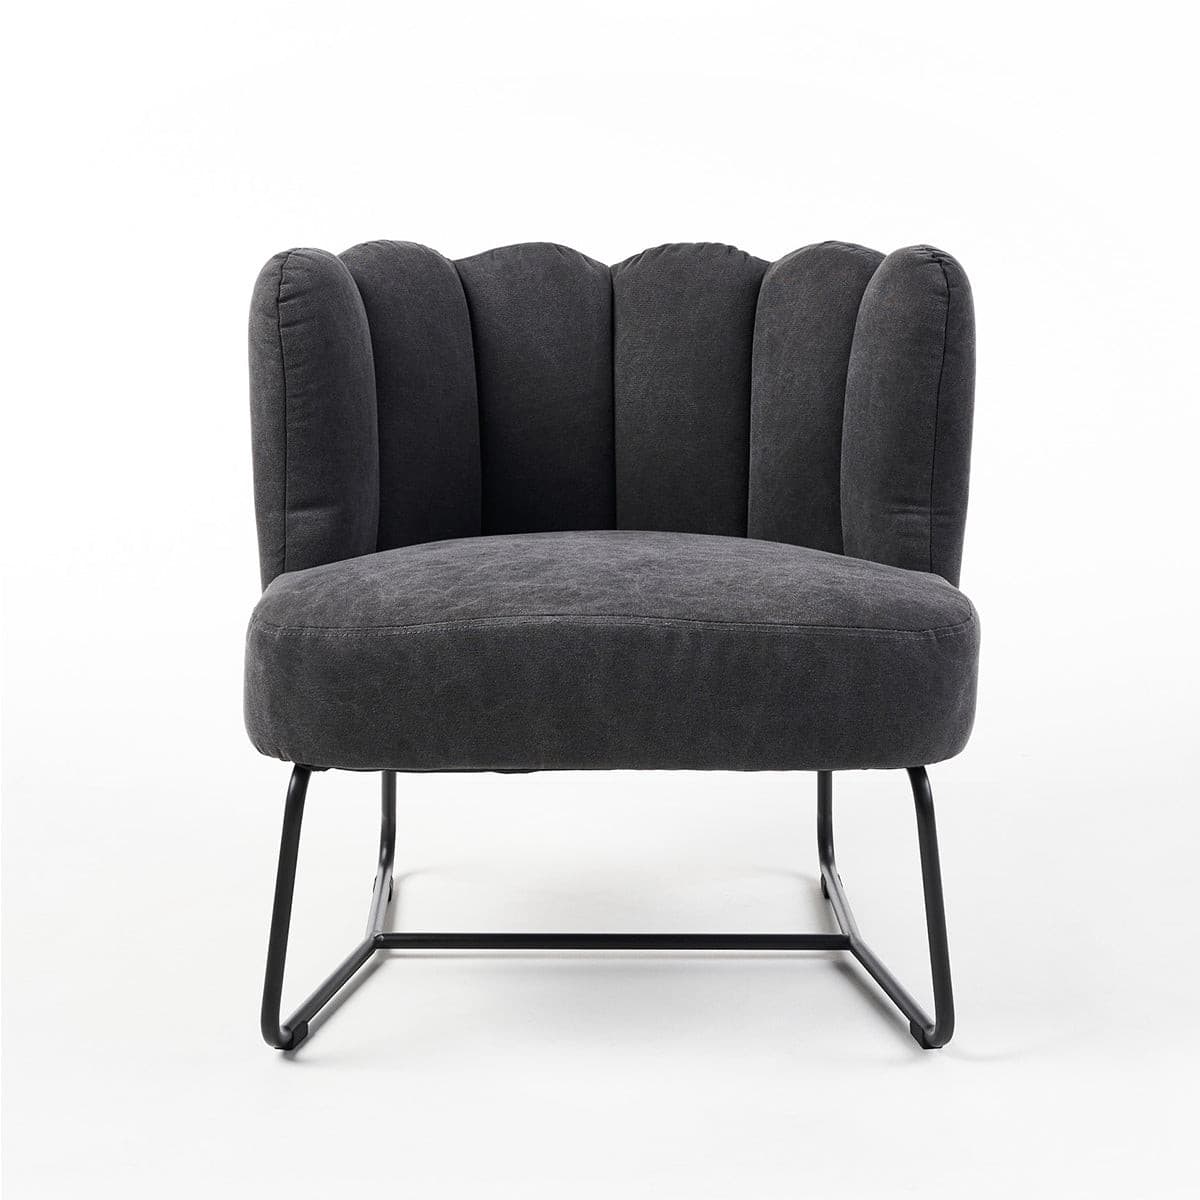 Darling Lounge Chair (Cotton Charcoal).